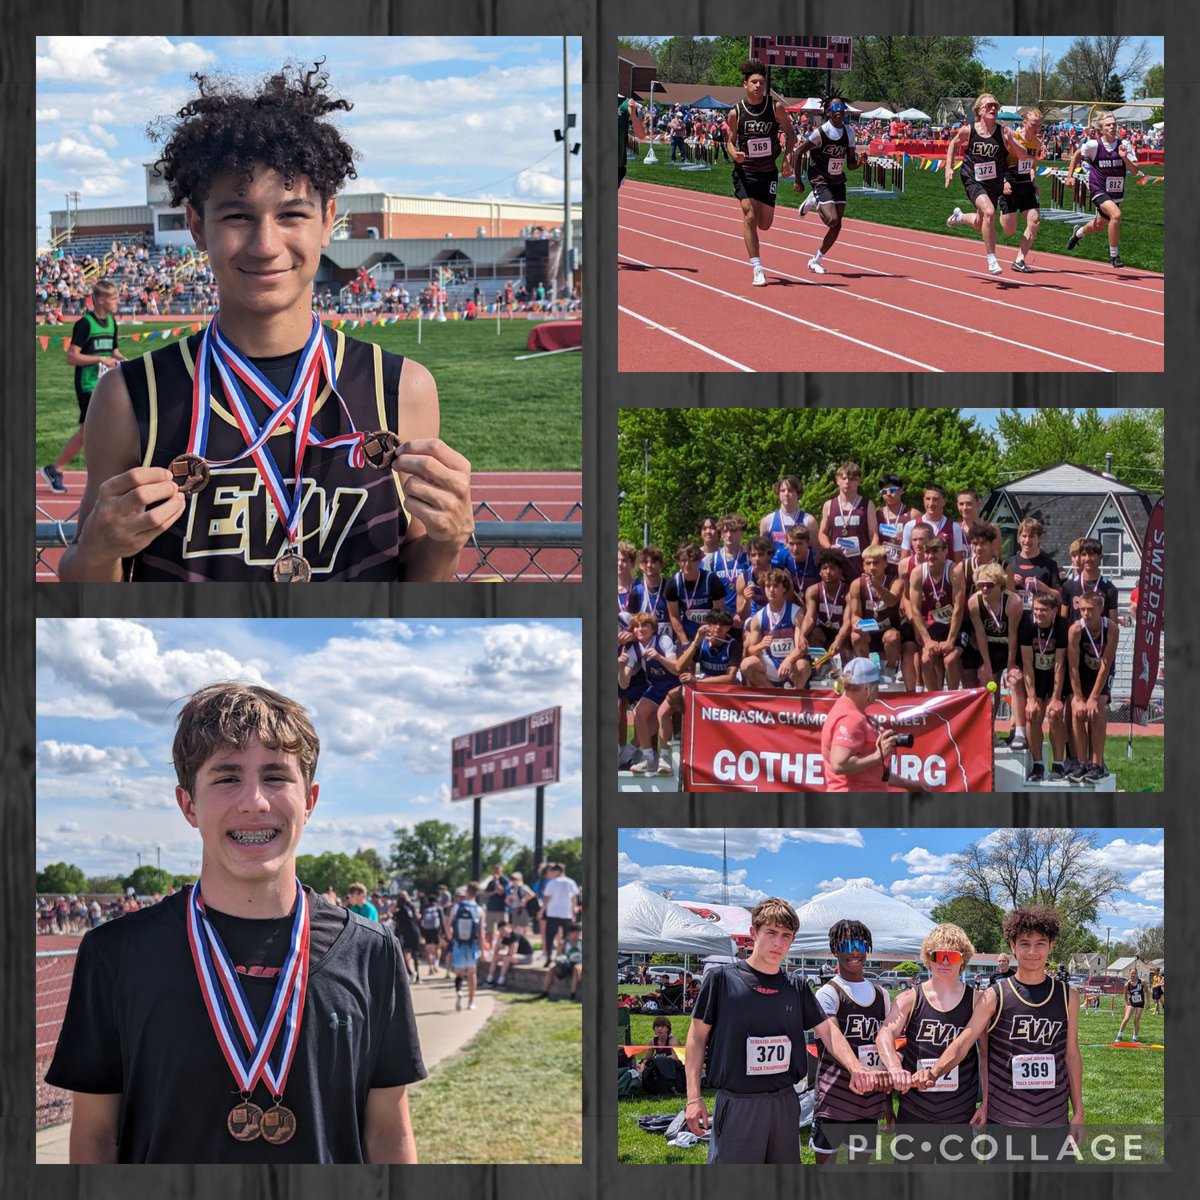 EVV competed at Jr high State track meet in Gothenburg. Isaiah placed 6th in triple jump and 8th in the 100. Brooks got 7th in 110 hurdles and Isaiah, Brooks, Gavin, and Titus beat the EVV school record by getting 5th in relay! Congrats team! #EPSAchieves #WhatWeDoAtValleyView